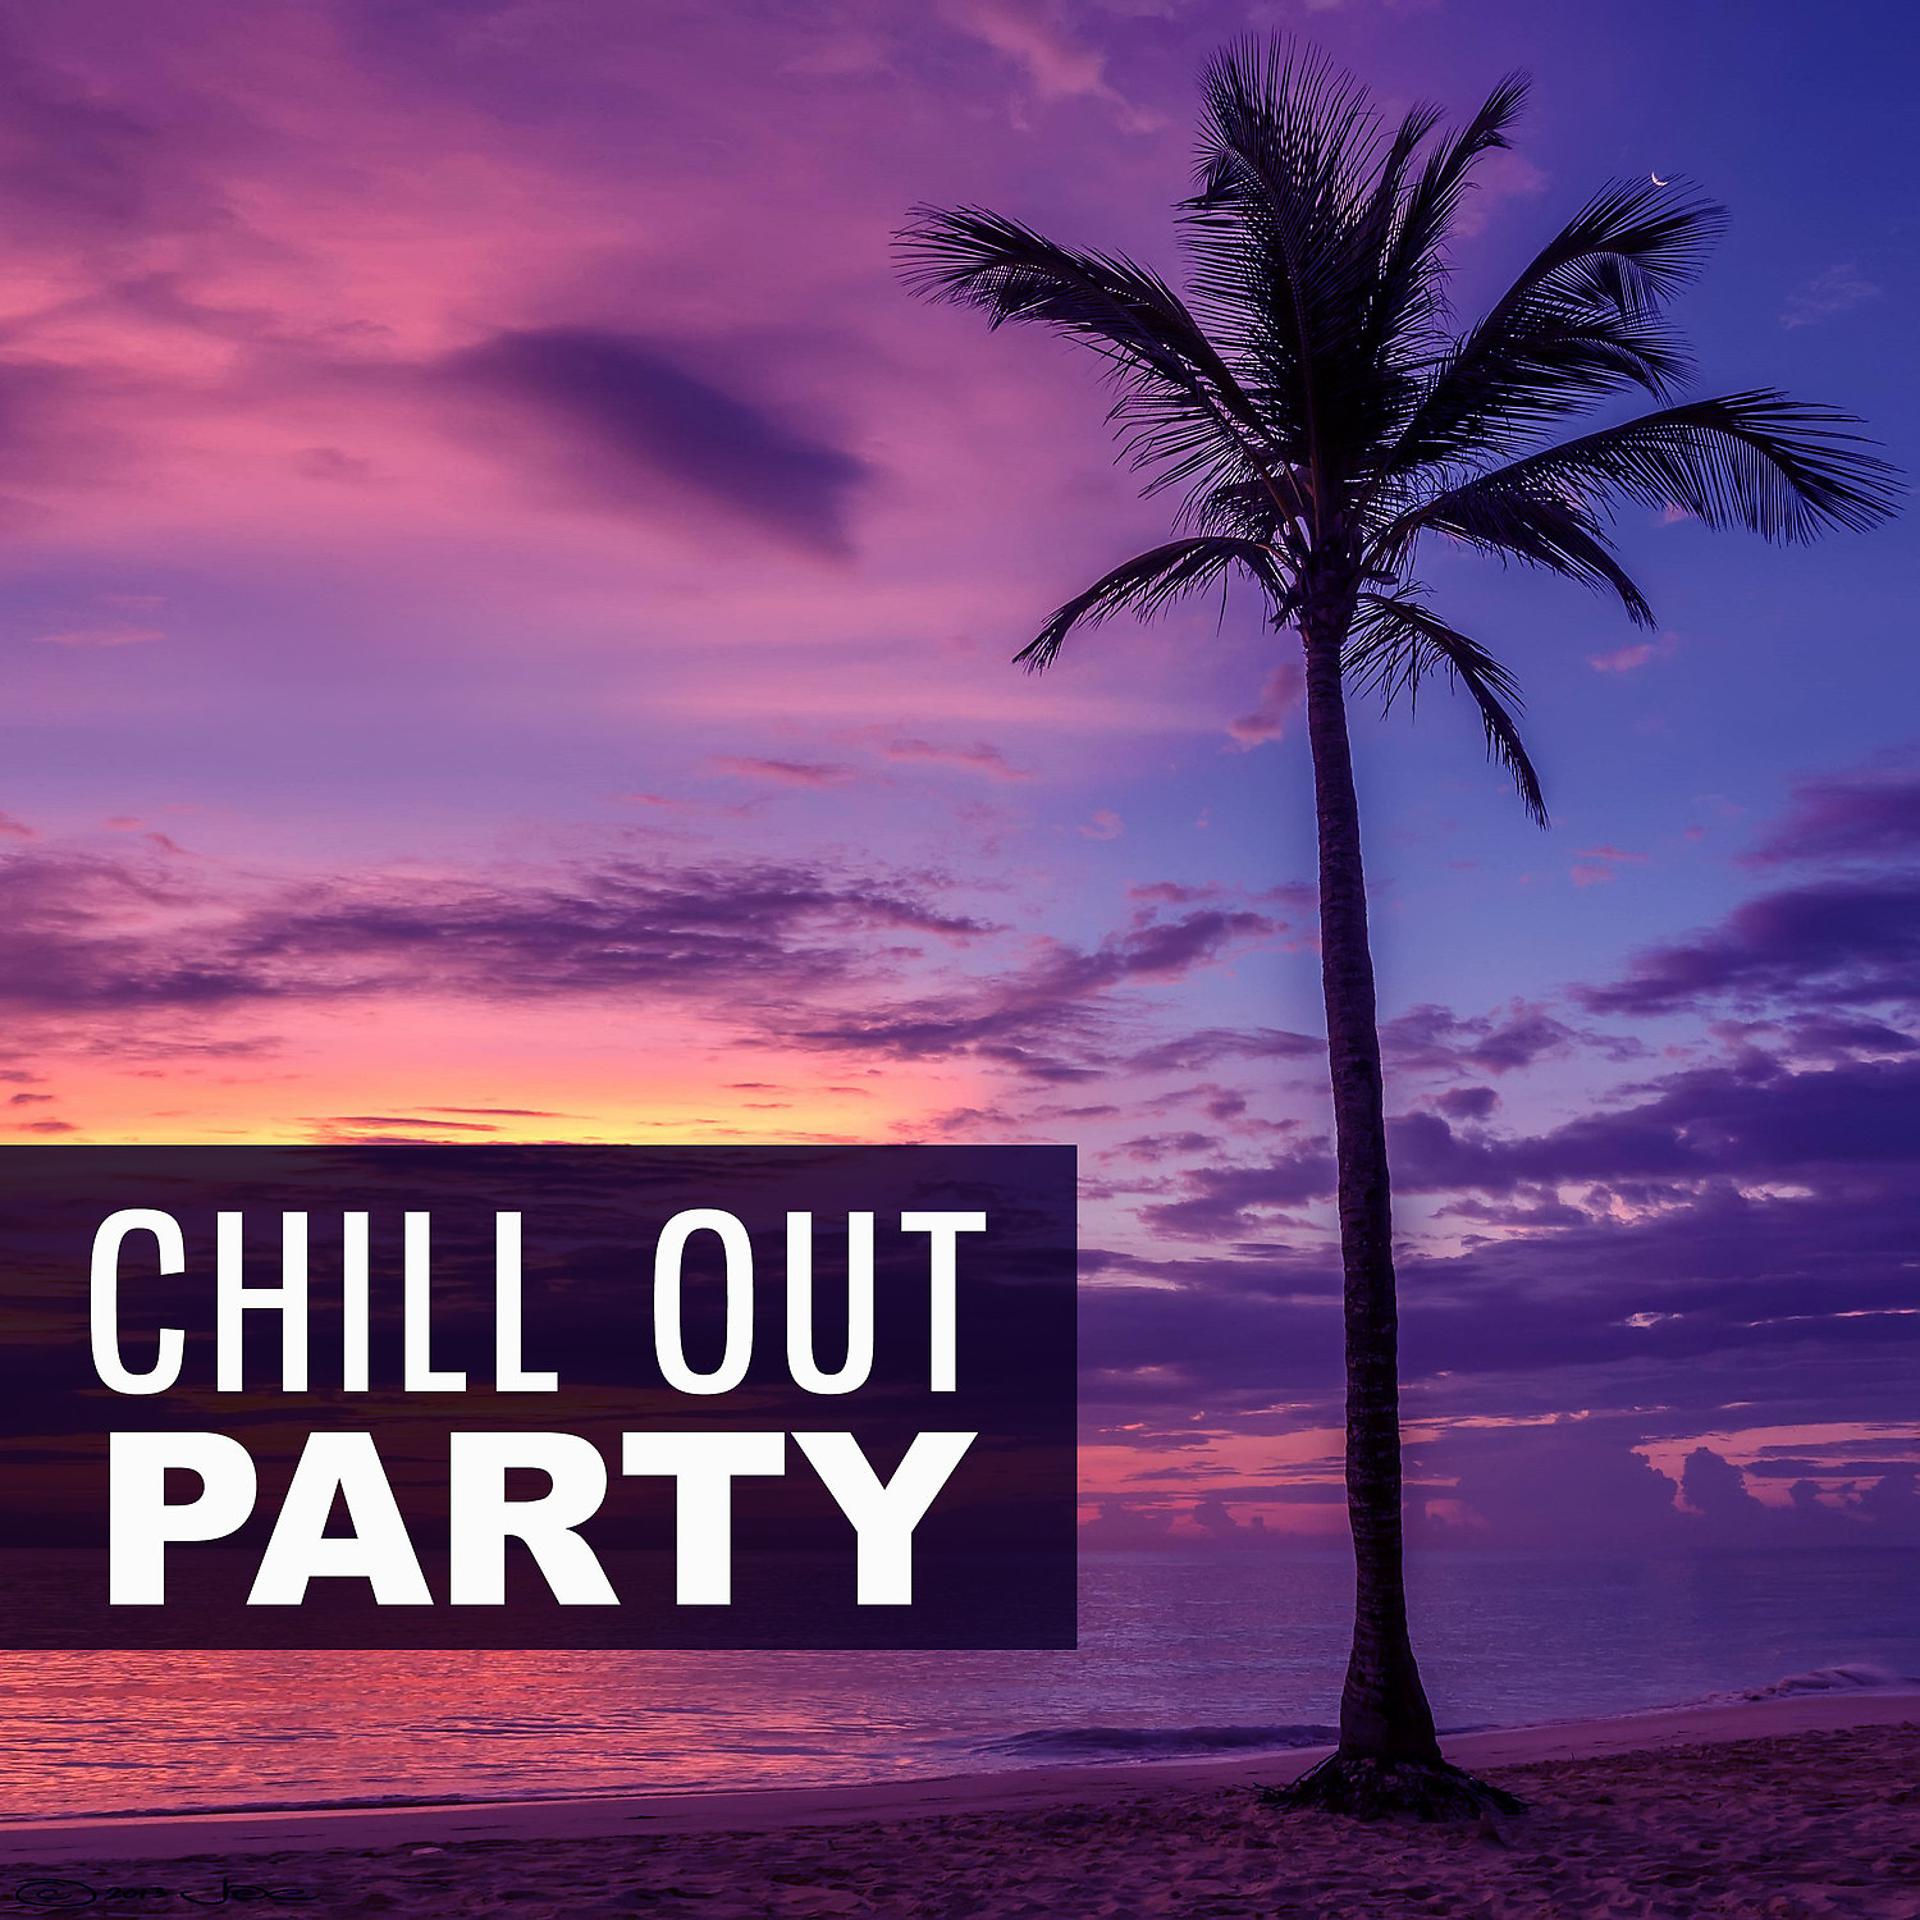 Chill chillout